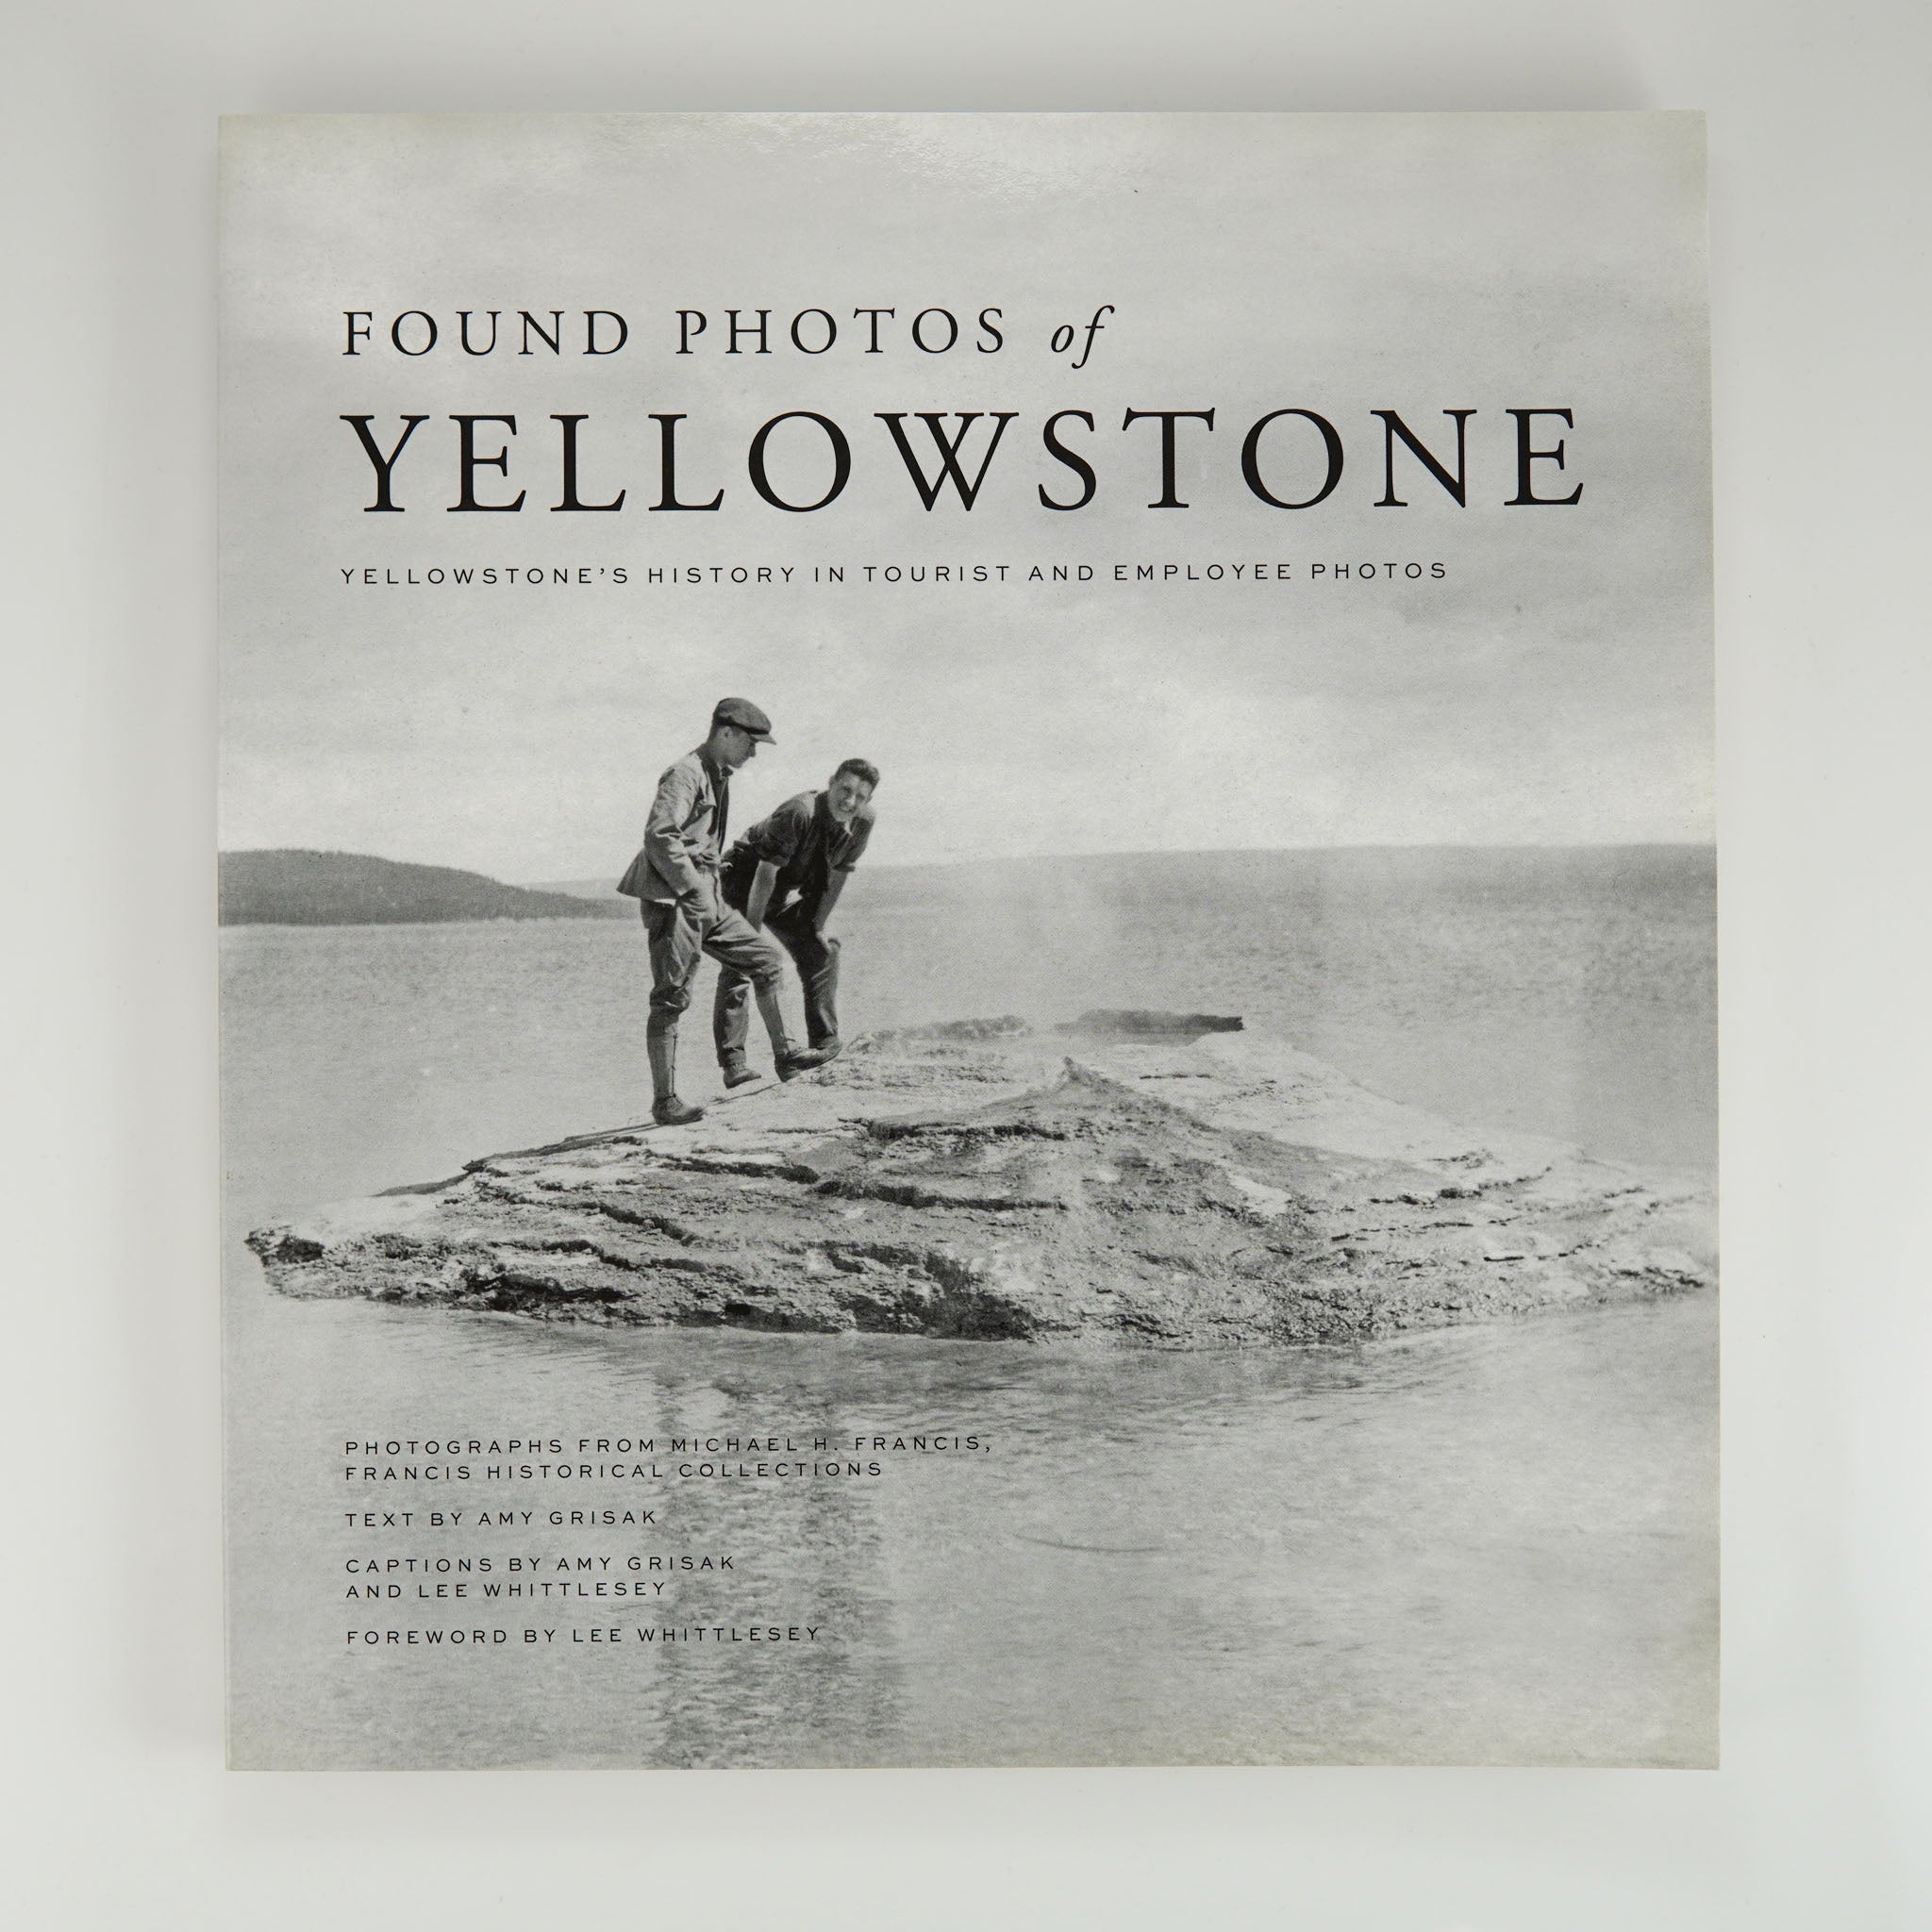 BK 10 FOUND PHOTOS OF YELLOWSTONE #17055 D2 MAY24